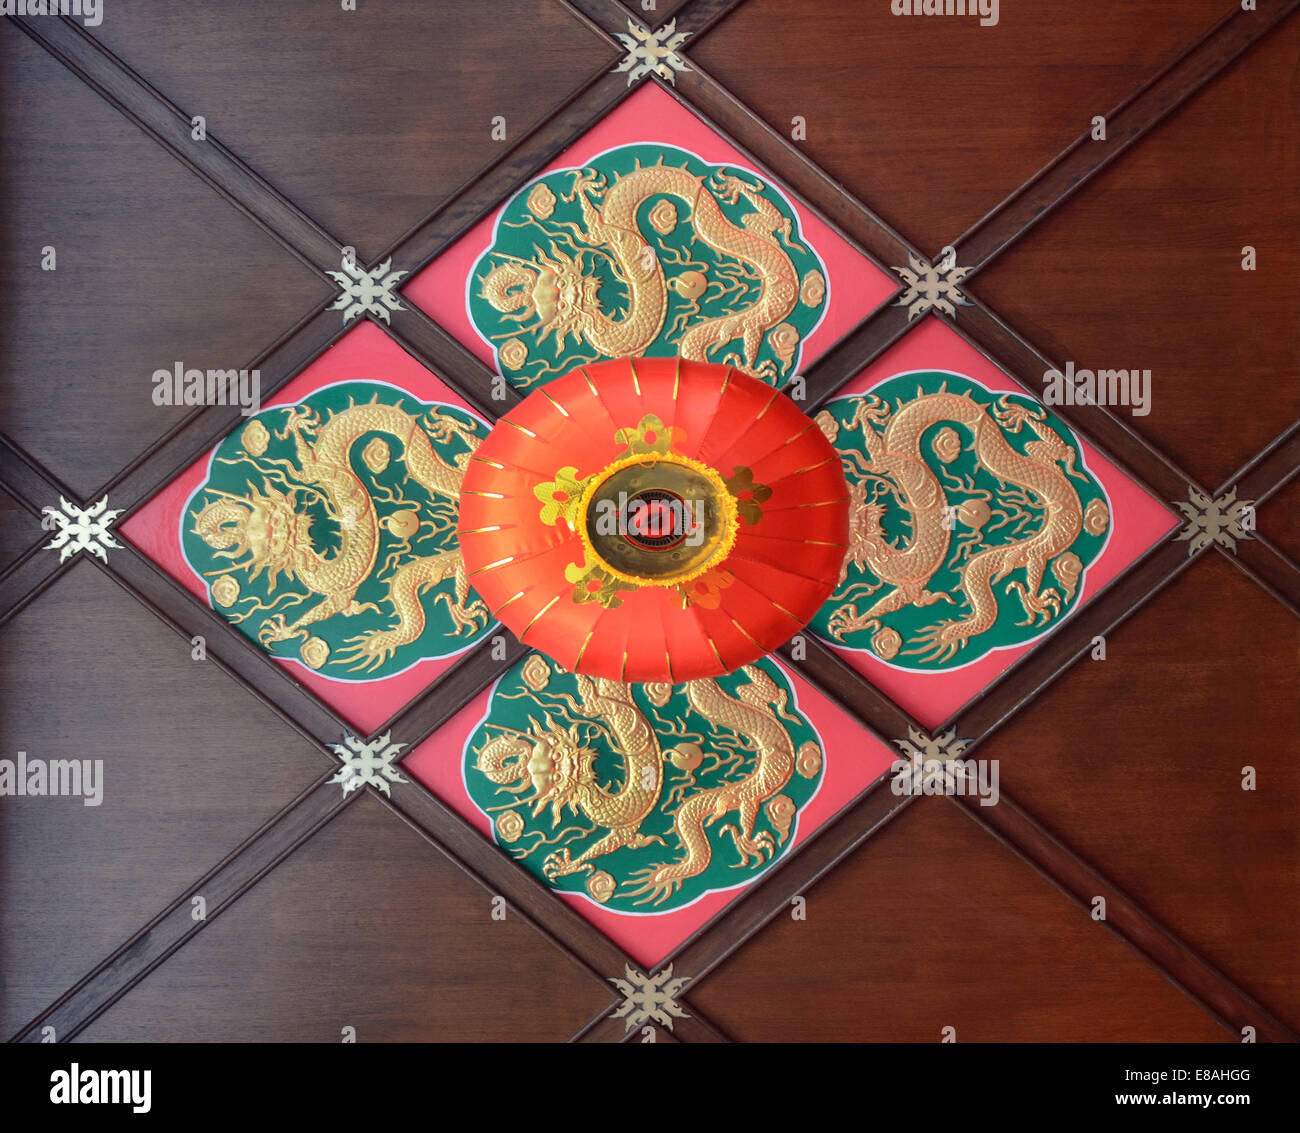 Red lantern and dragon motifs on ceiling of Buddhist temple Stock Photo